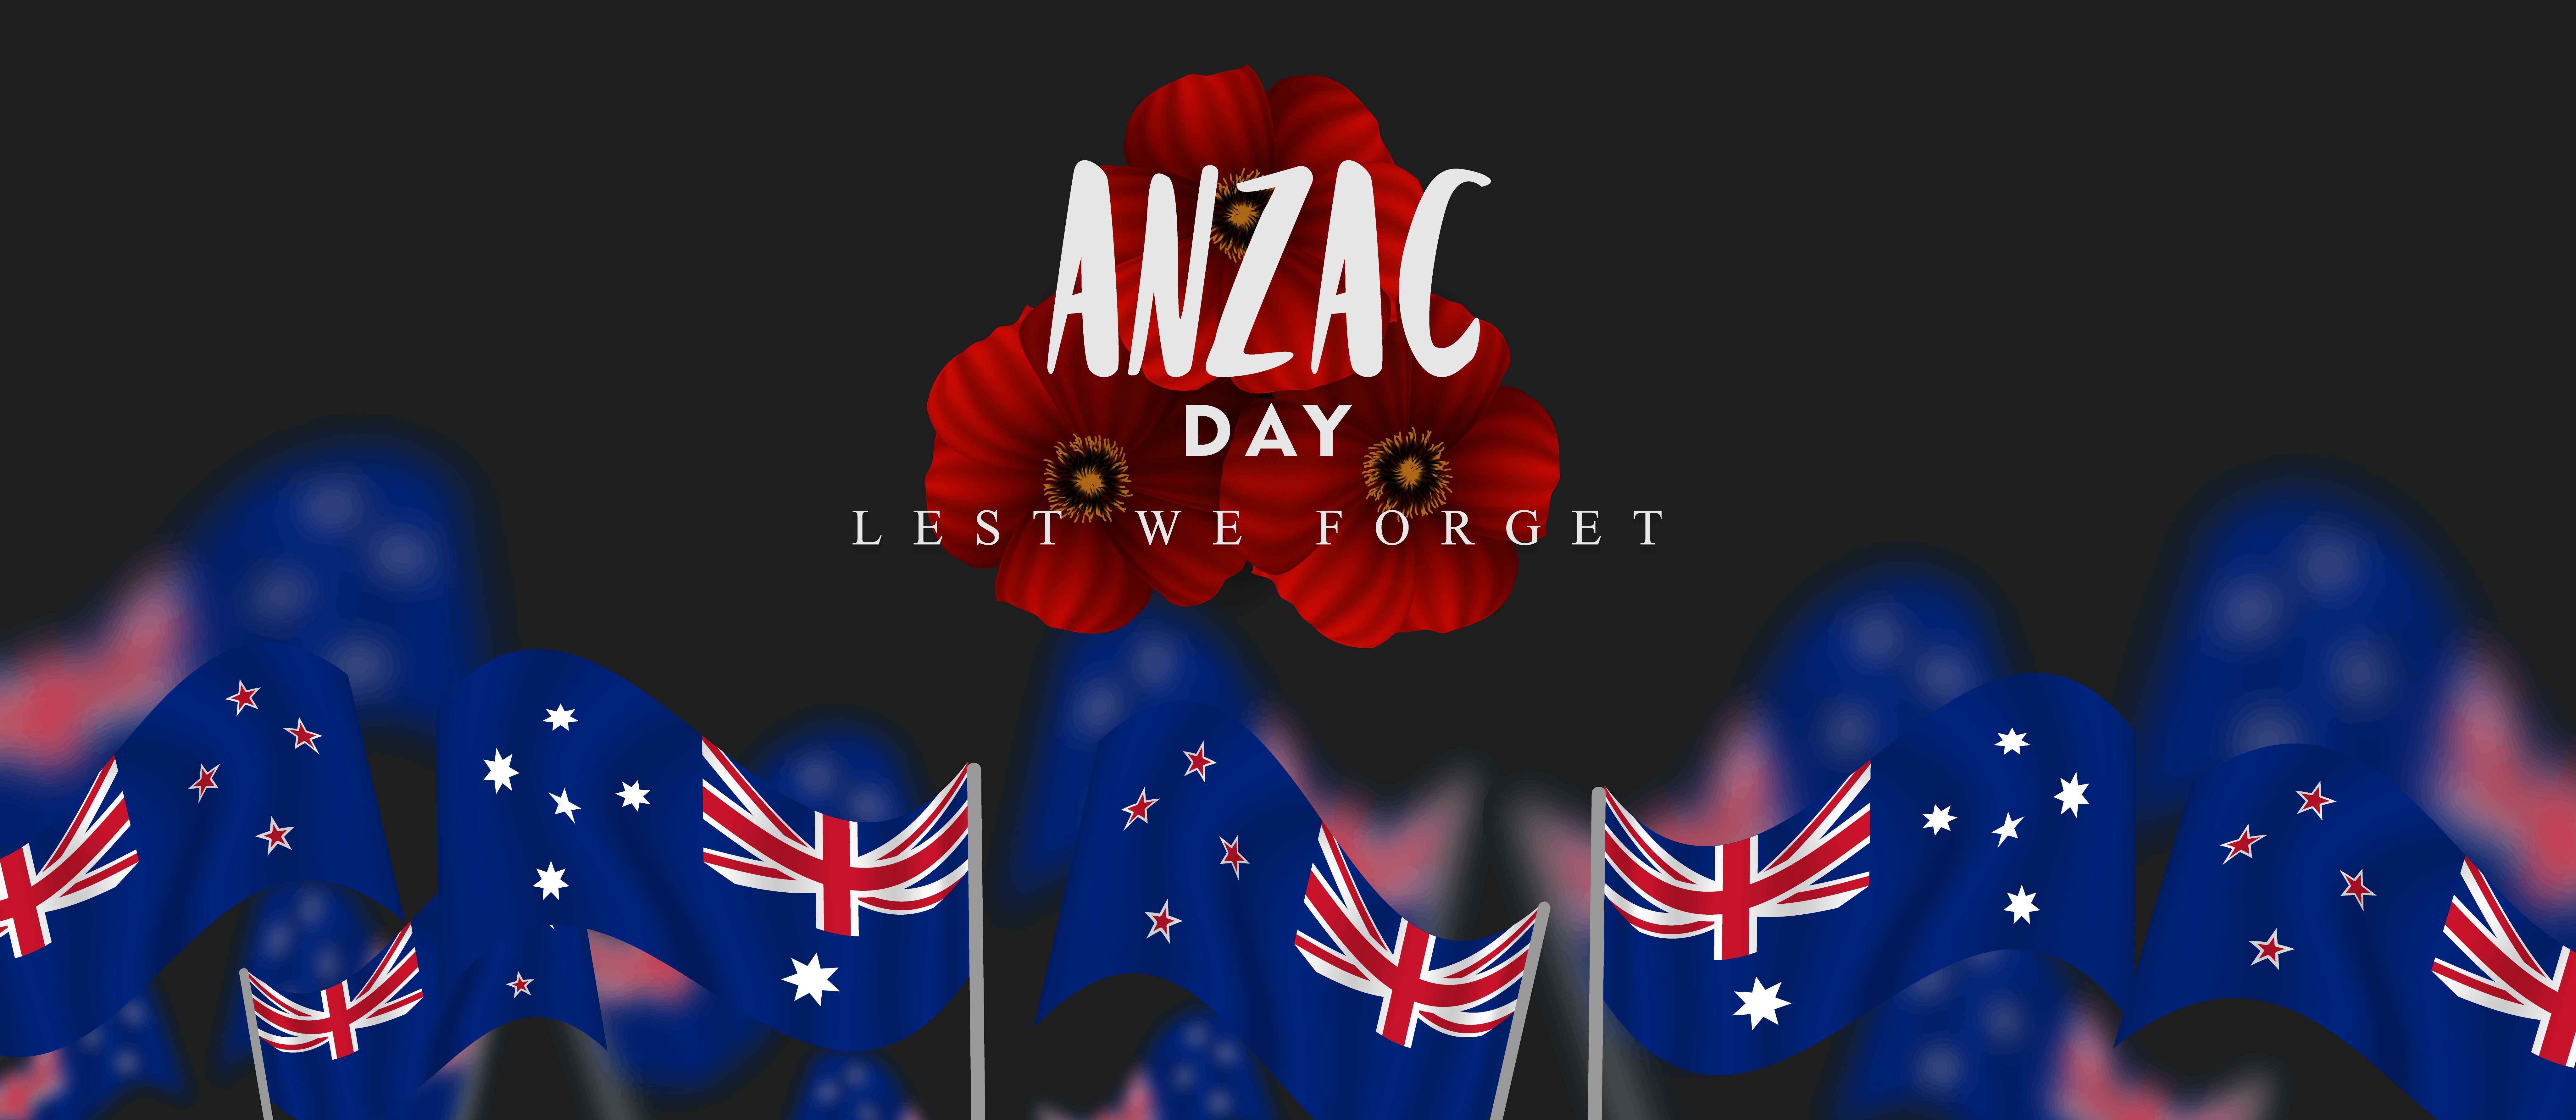 ANZAC Day a national day of remembrance in Australia and New Zealand Beechwood